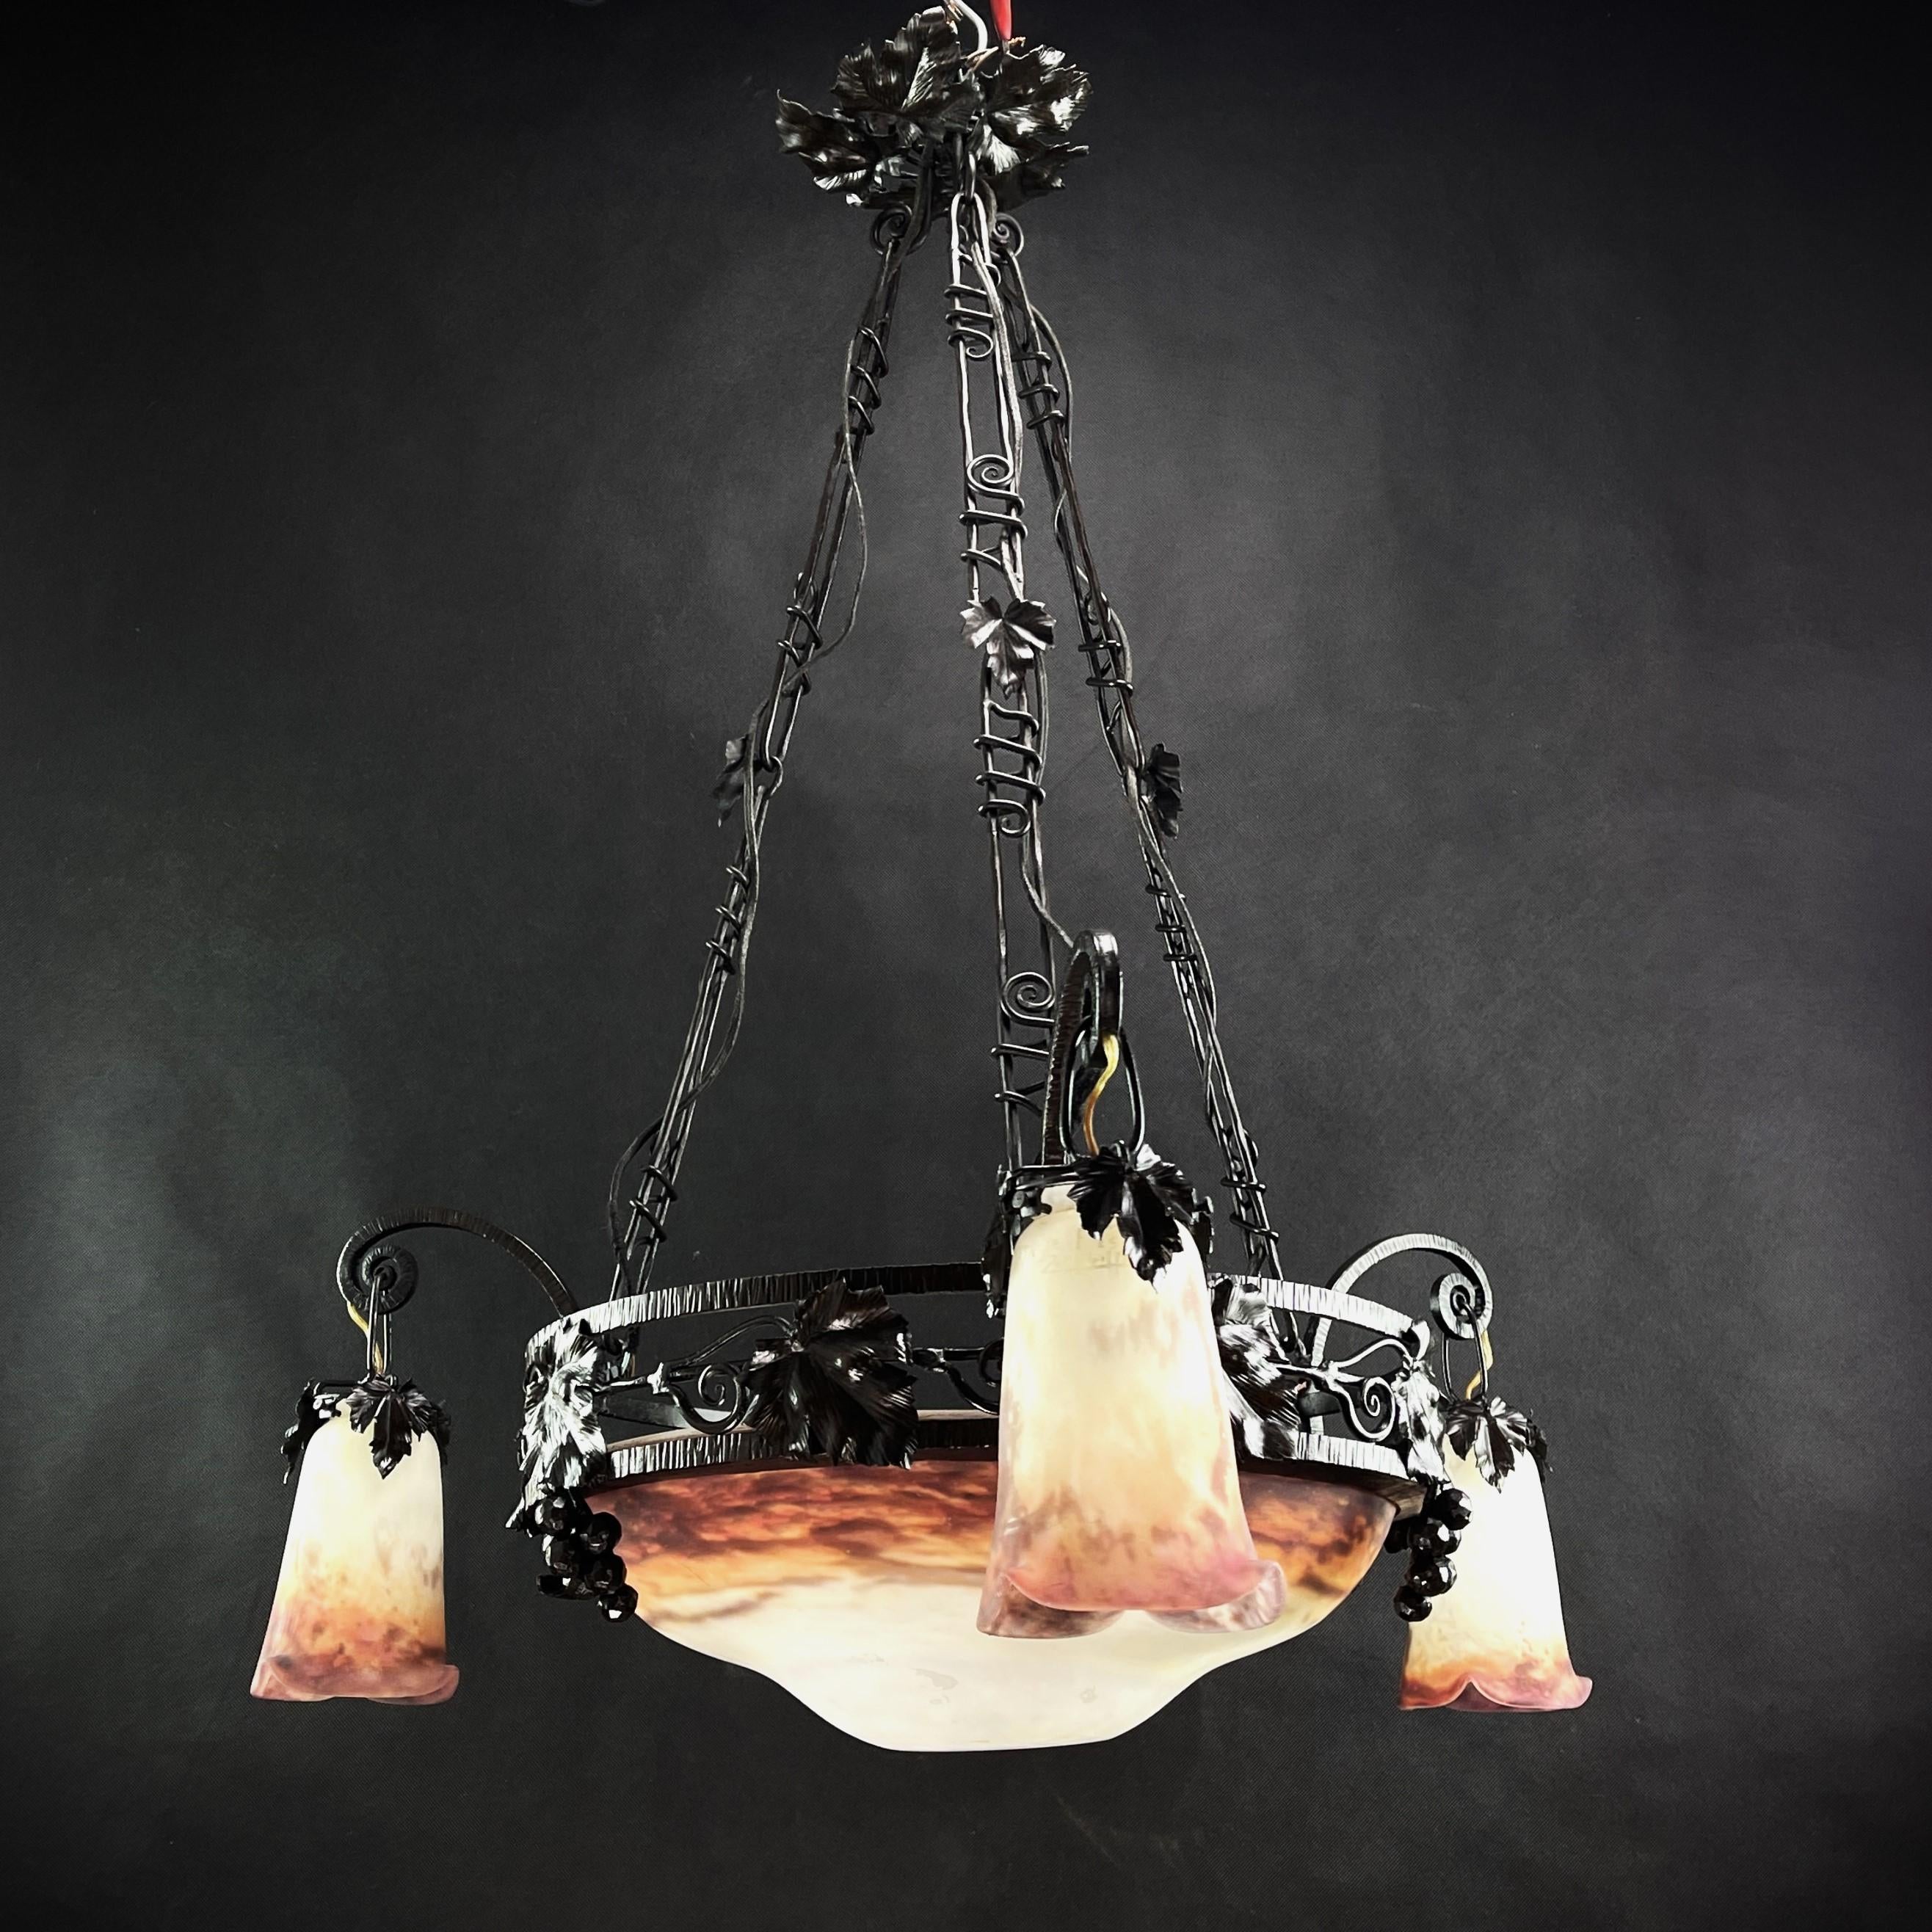 Art Deco chandelier by Muller Fréres - 1930s

This original pendant lamp captivates with its simple and matter-of-fact Art Deco design. The heavy lamp with its colorful Pate de Verre glas is signed and gives a very pleasant light. This ceiling